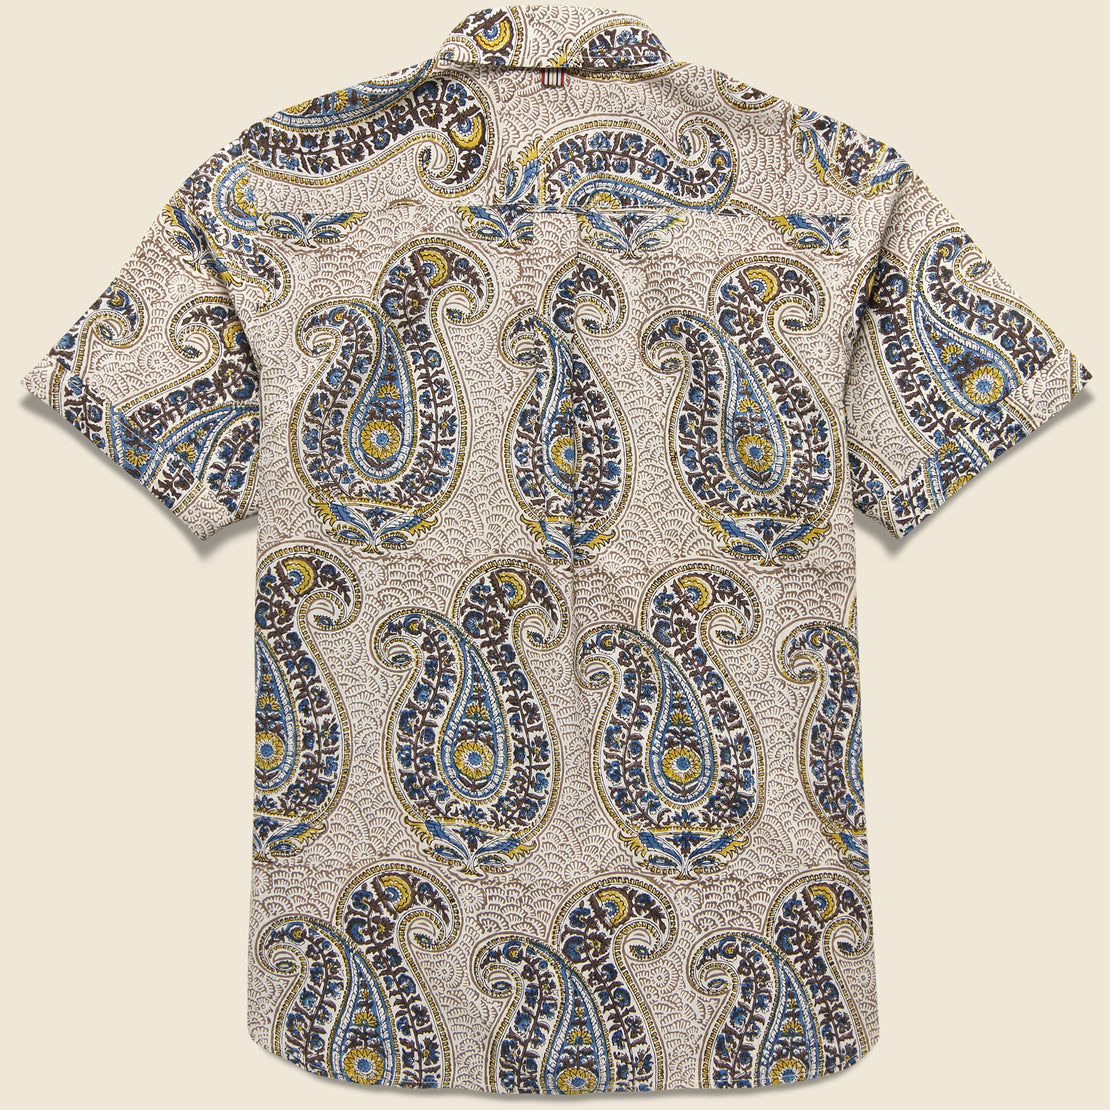 Henry Big Paisley Block Print Shirt - Tan/Gold/Blue - Kardo - STAG Provisions - Tops - S/S Woven - Other Pattern